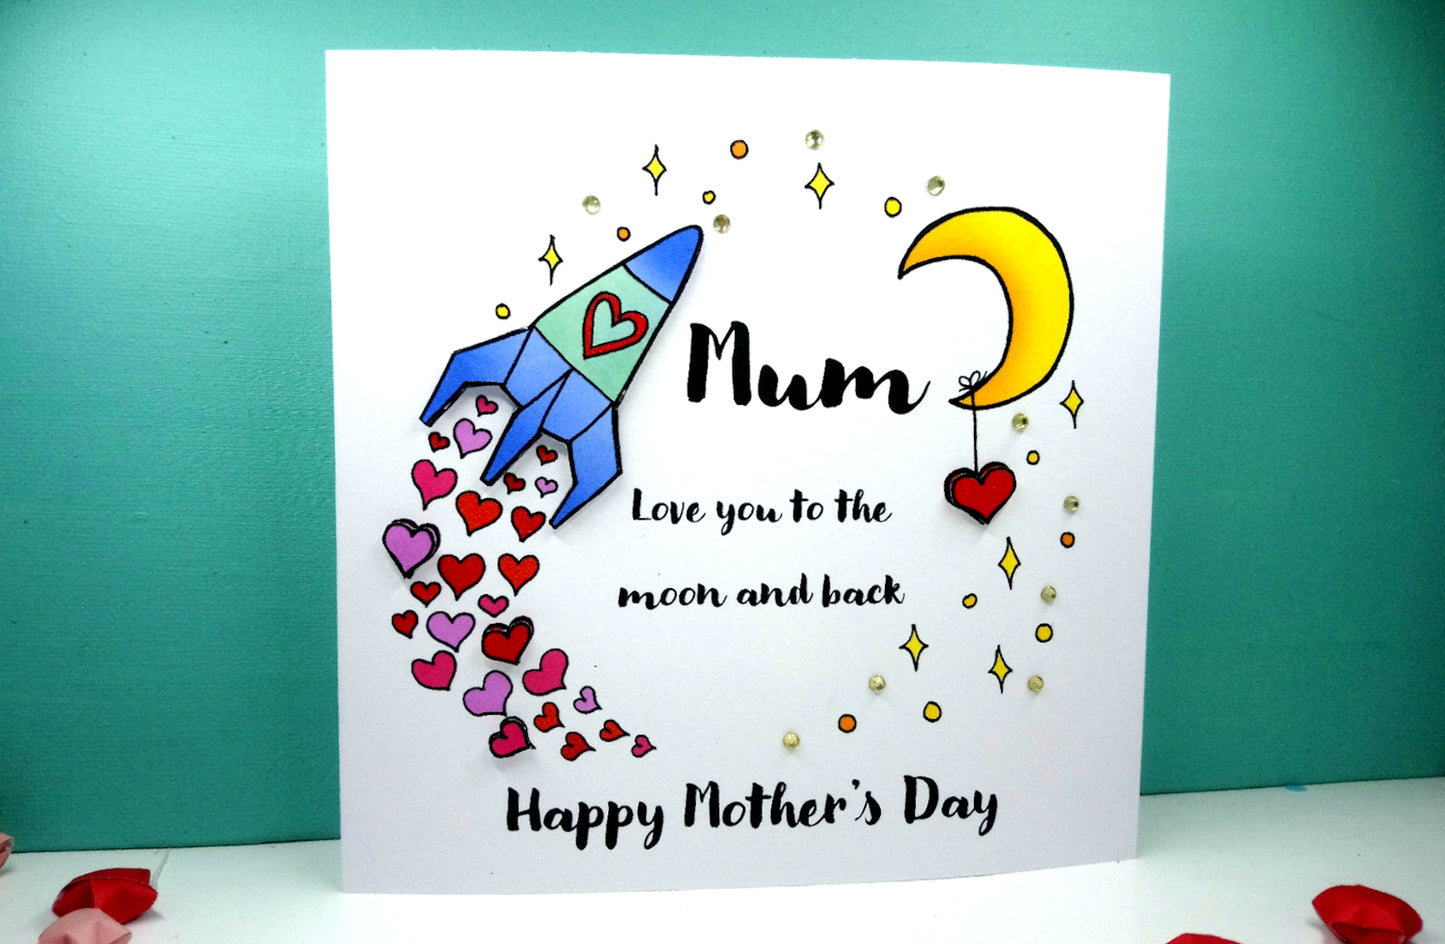 Mum Love you to the moon and back Mothers Day Card